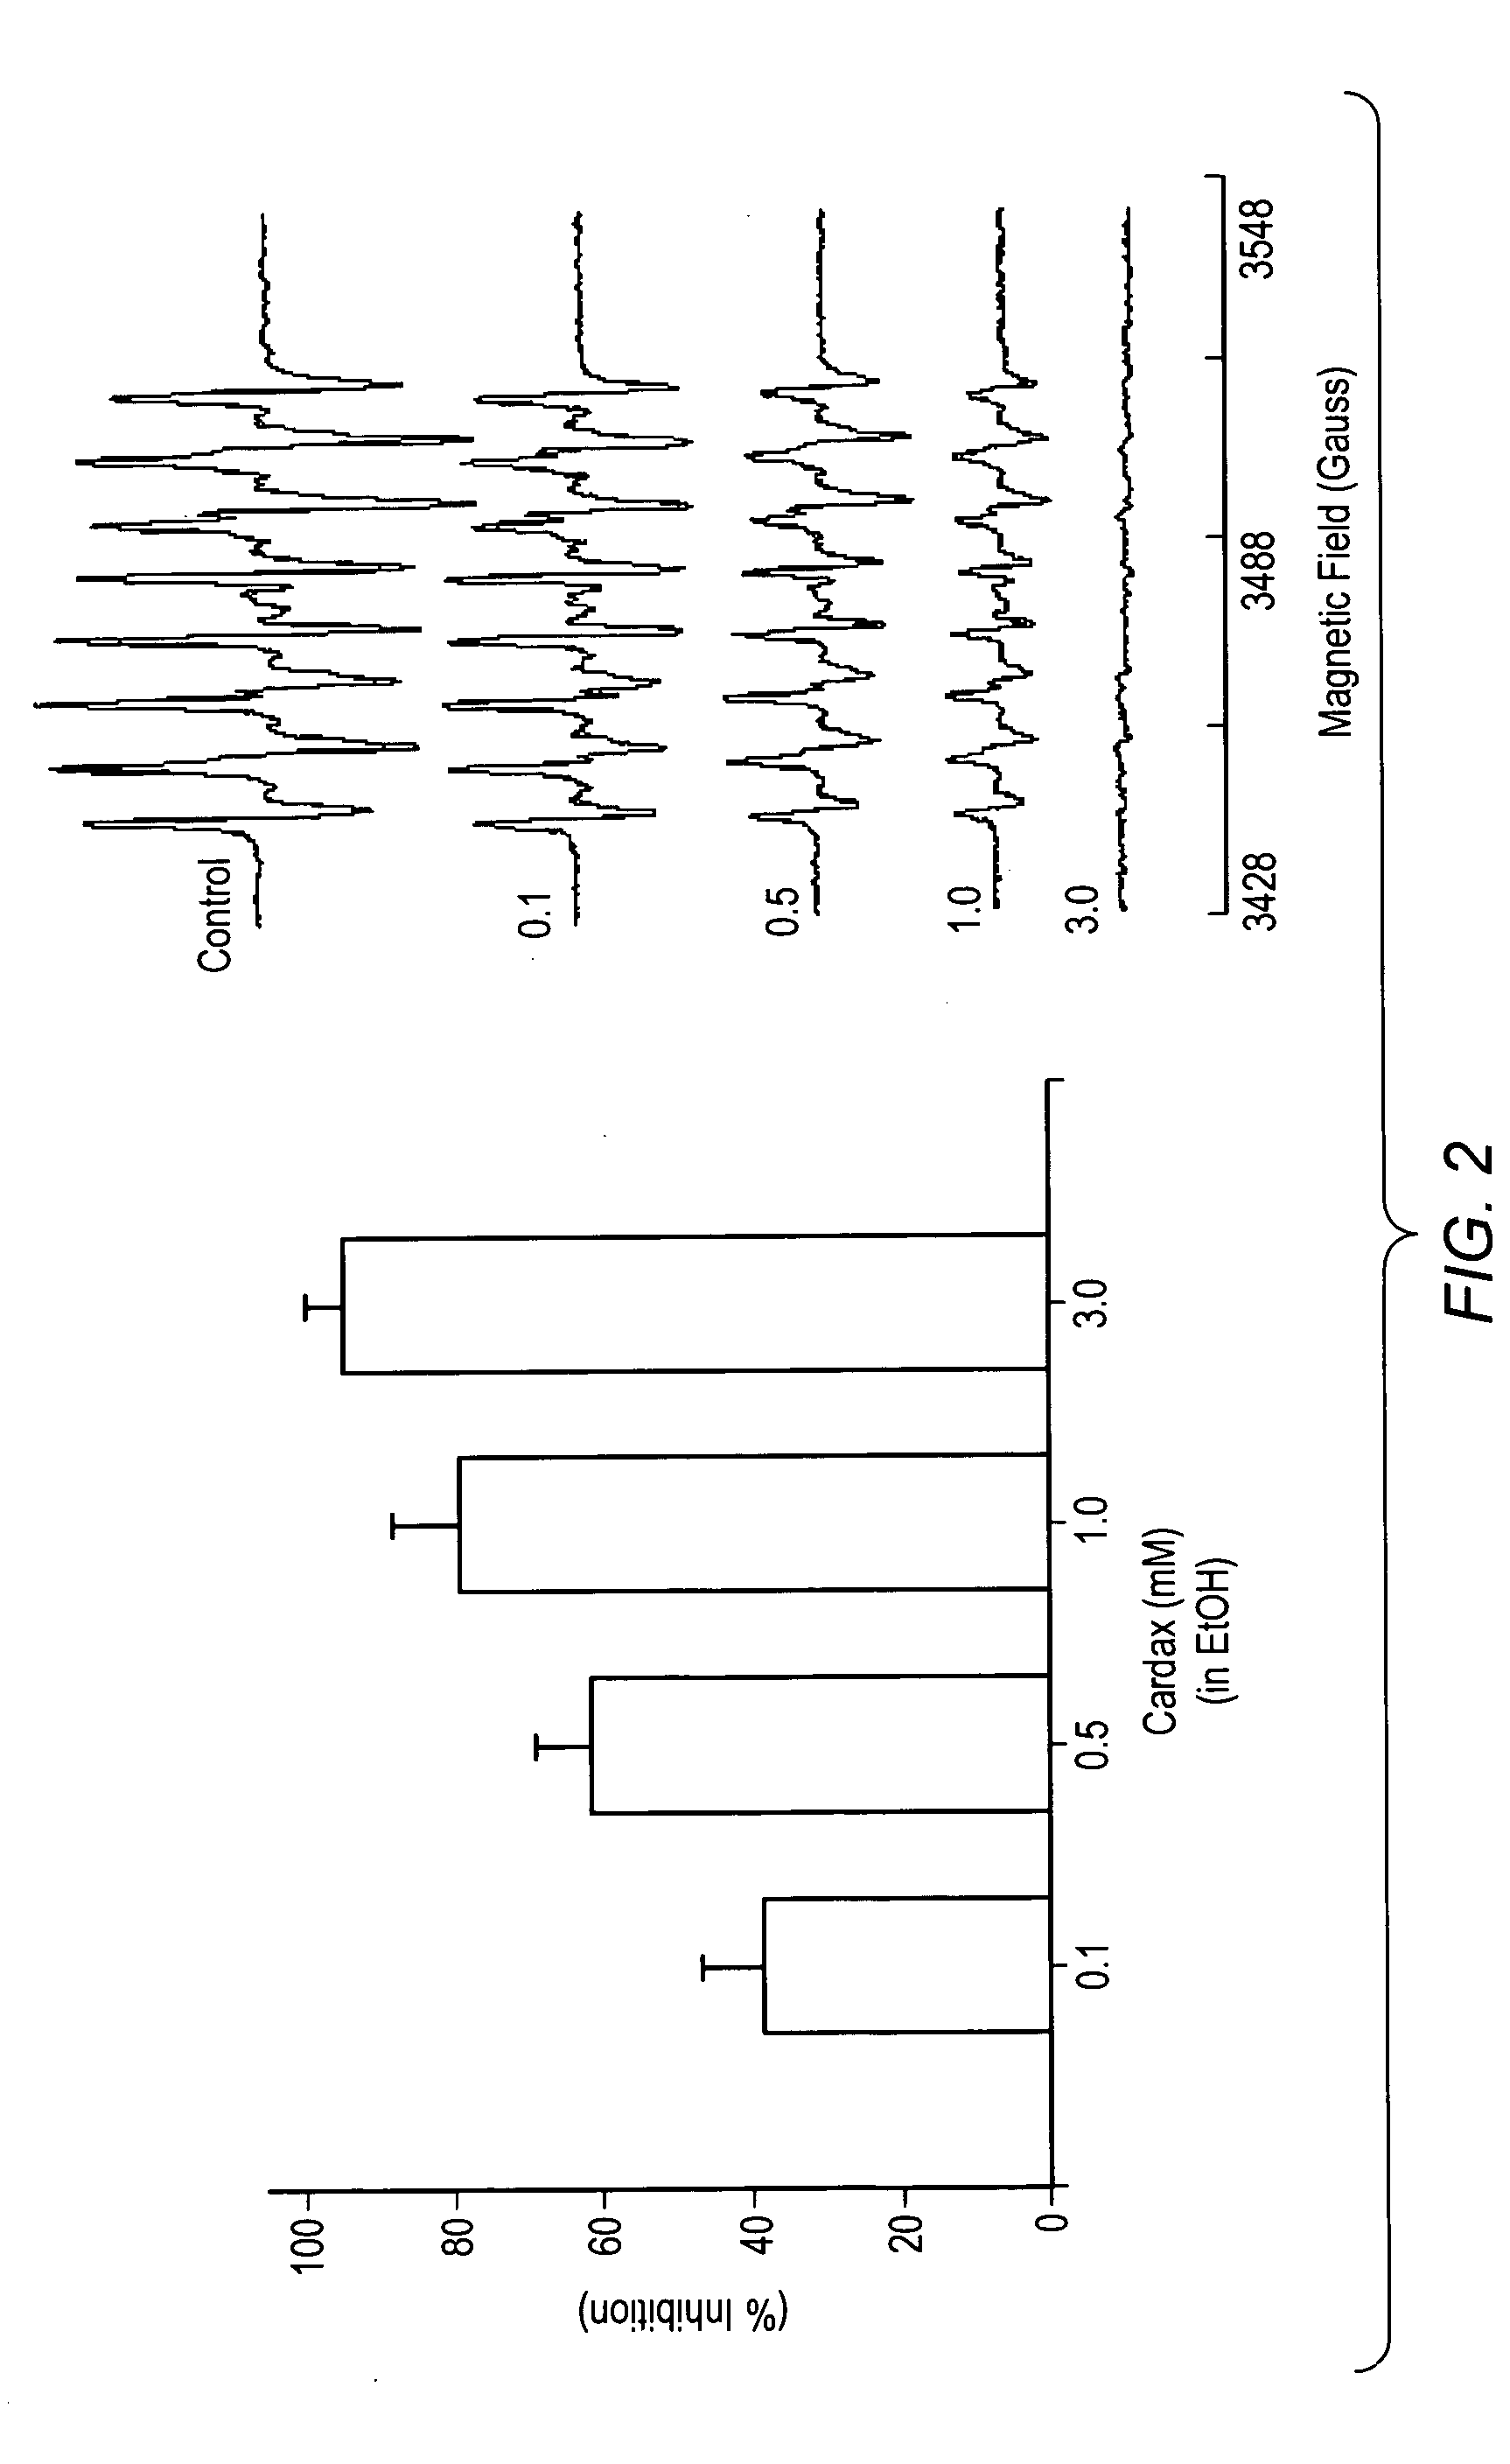 Pharmaceutical compositions including carotenoid analogs or derivatives for the inhabition and amelioration of disease